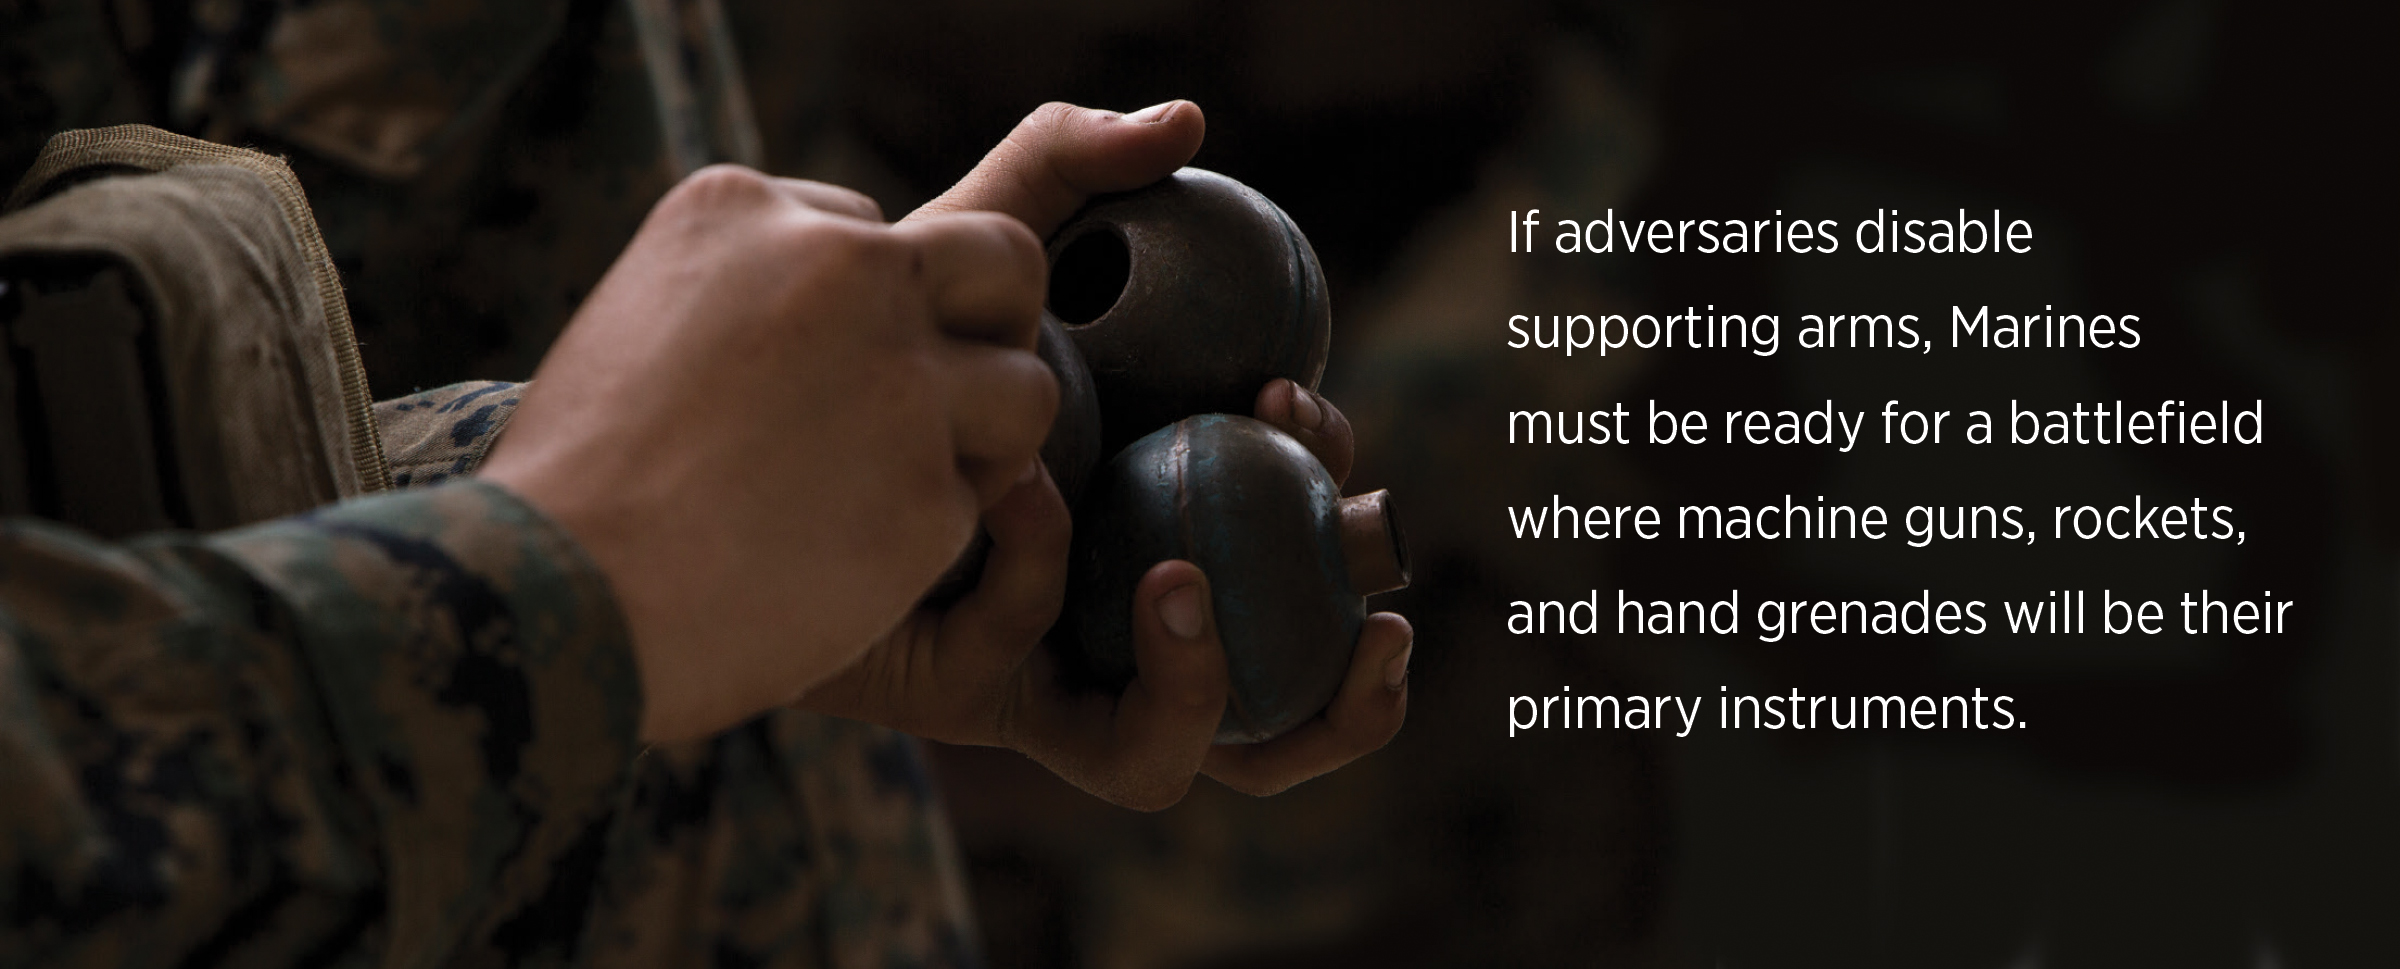 If adversaries disable supporting arms, Marines must be ready for a battlefield where machine guns, rockets, and hand grenades will be their primary instruments.